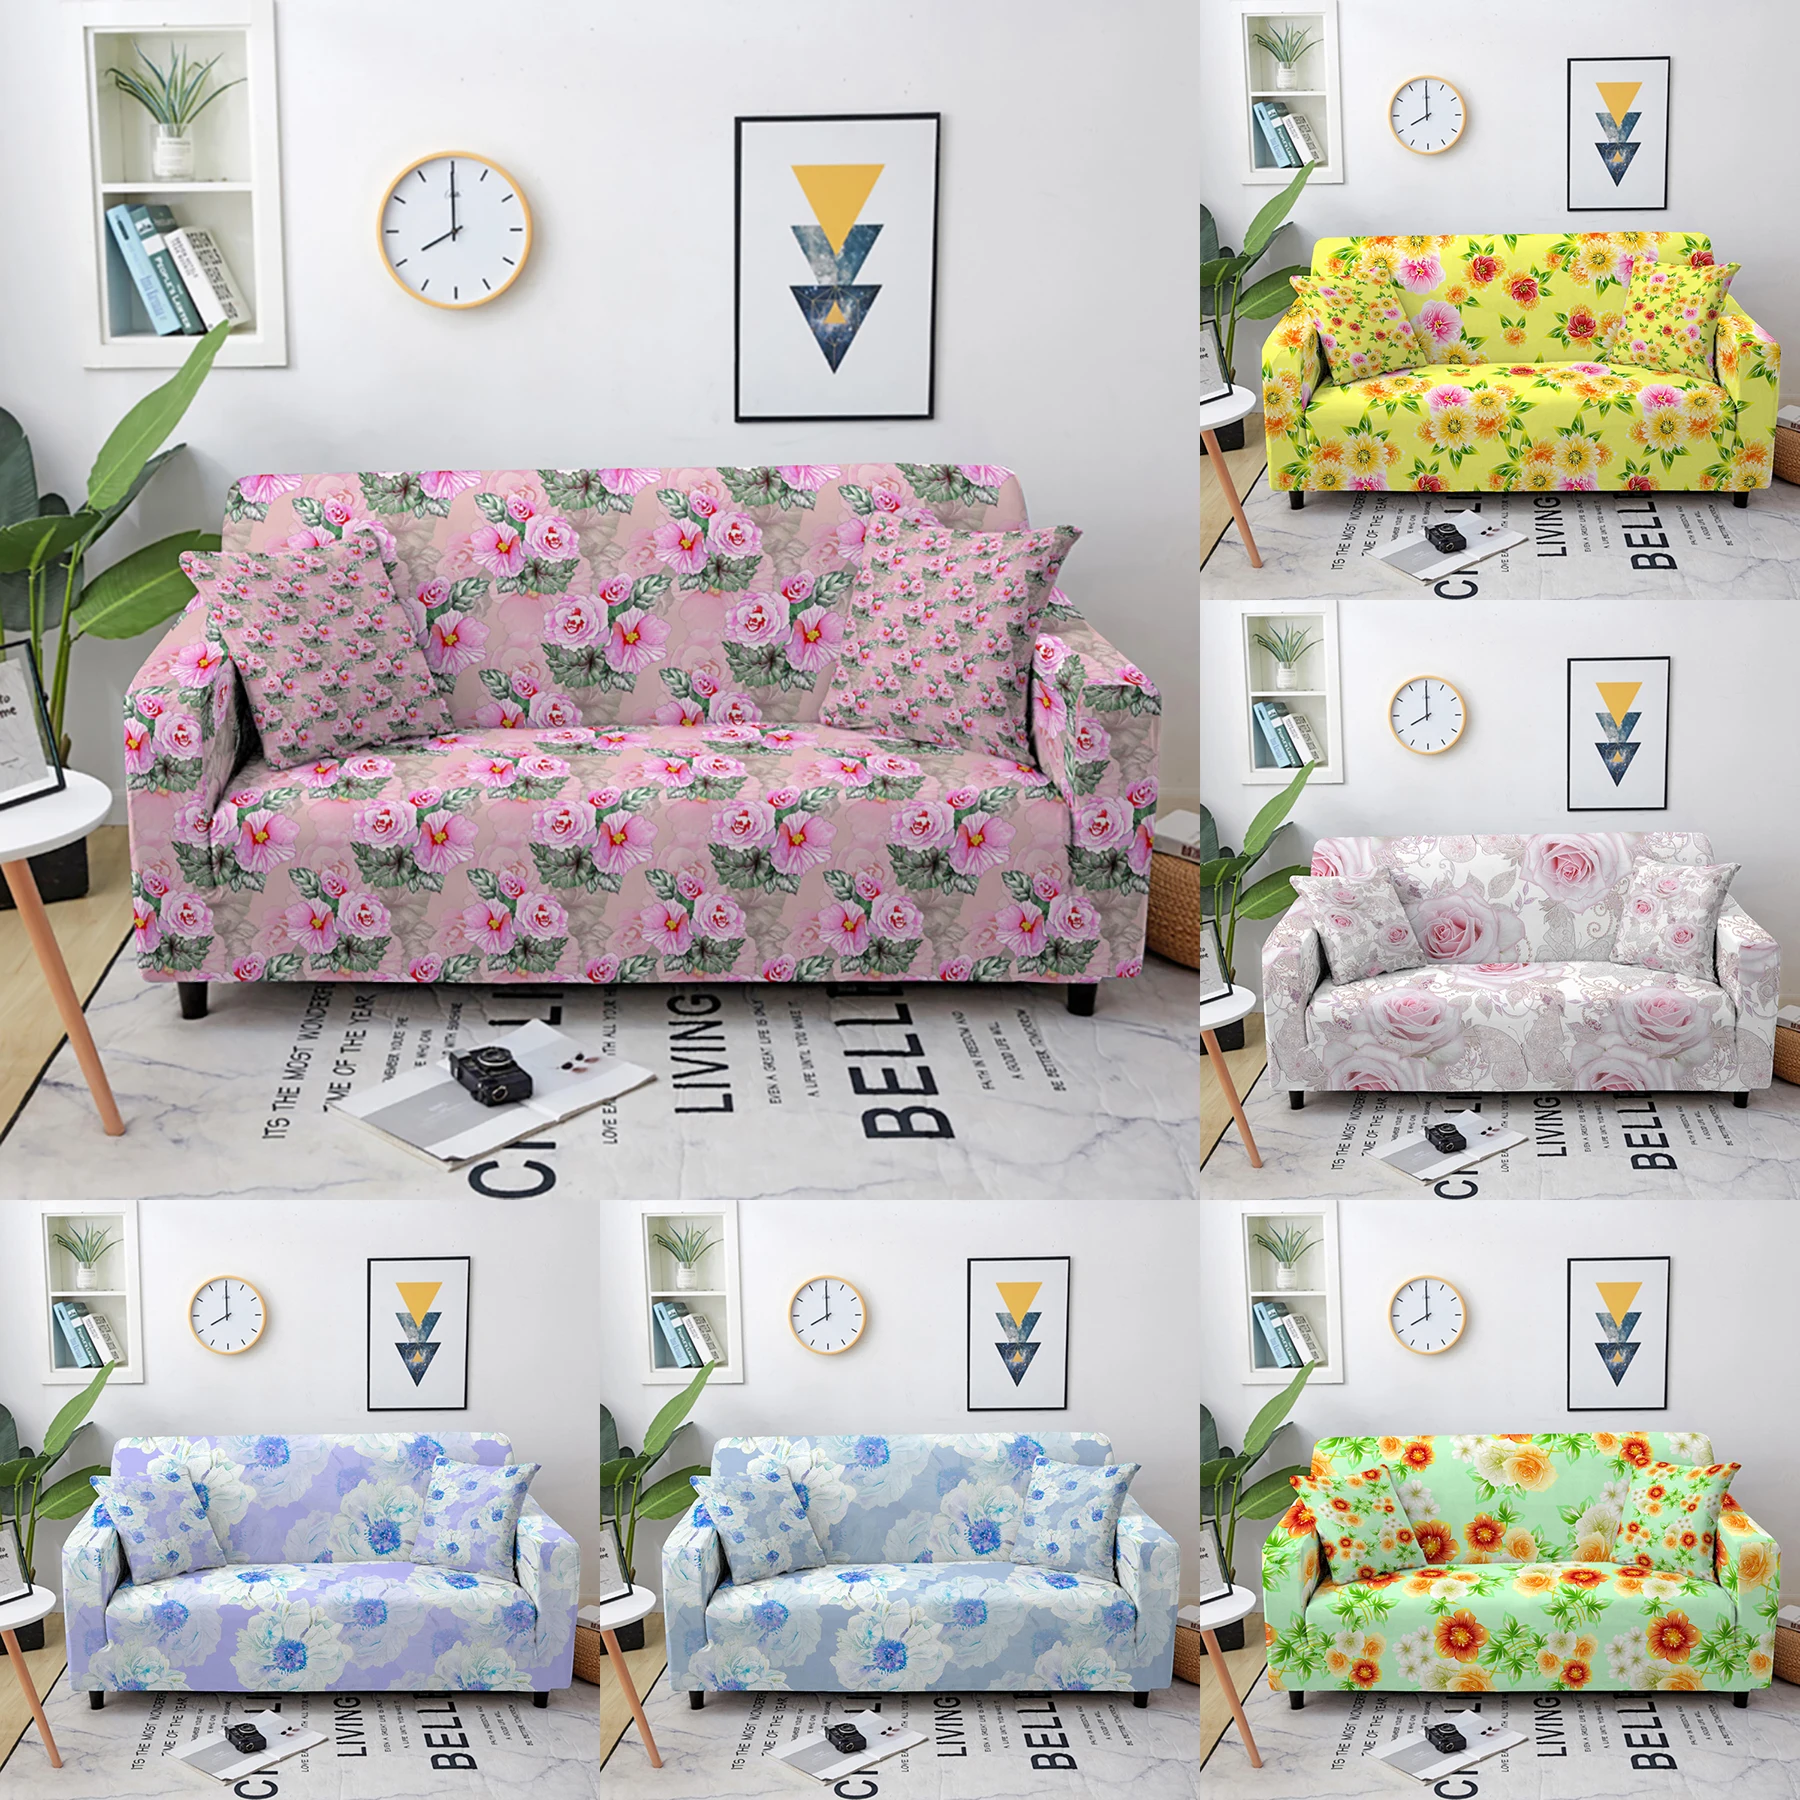 

3D Flowers Sofa Silpcover Colorful Sectional Fully-wrapped Corner Sofa Cover All-inclusive Elastic Sofa Protector Living Room